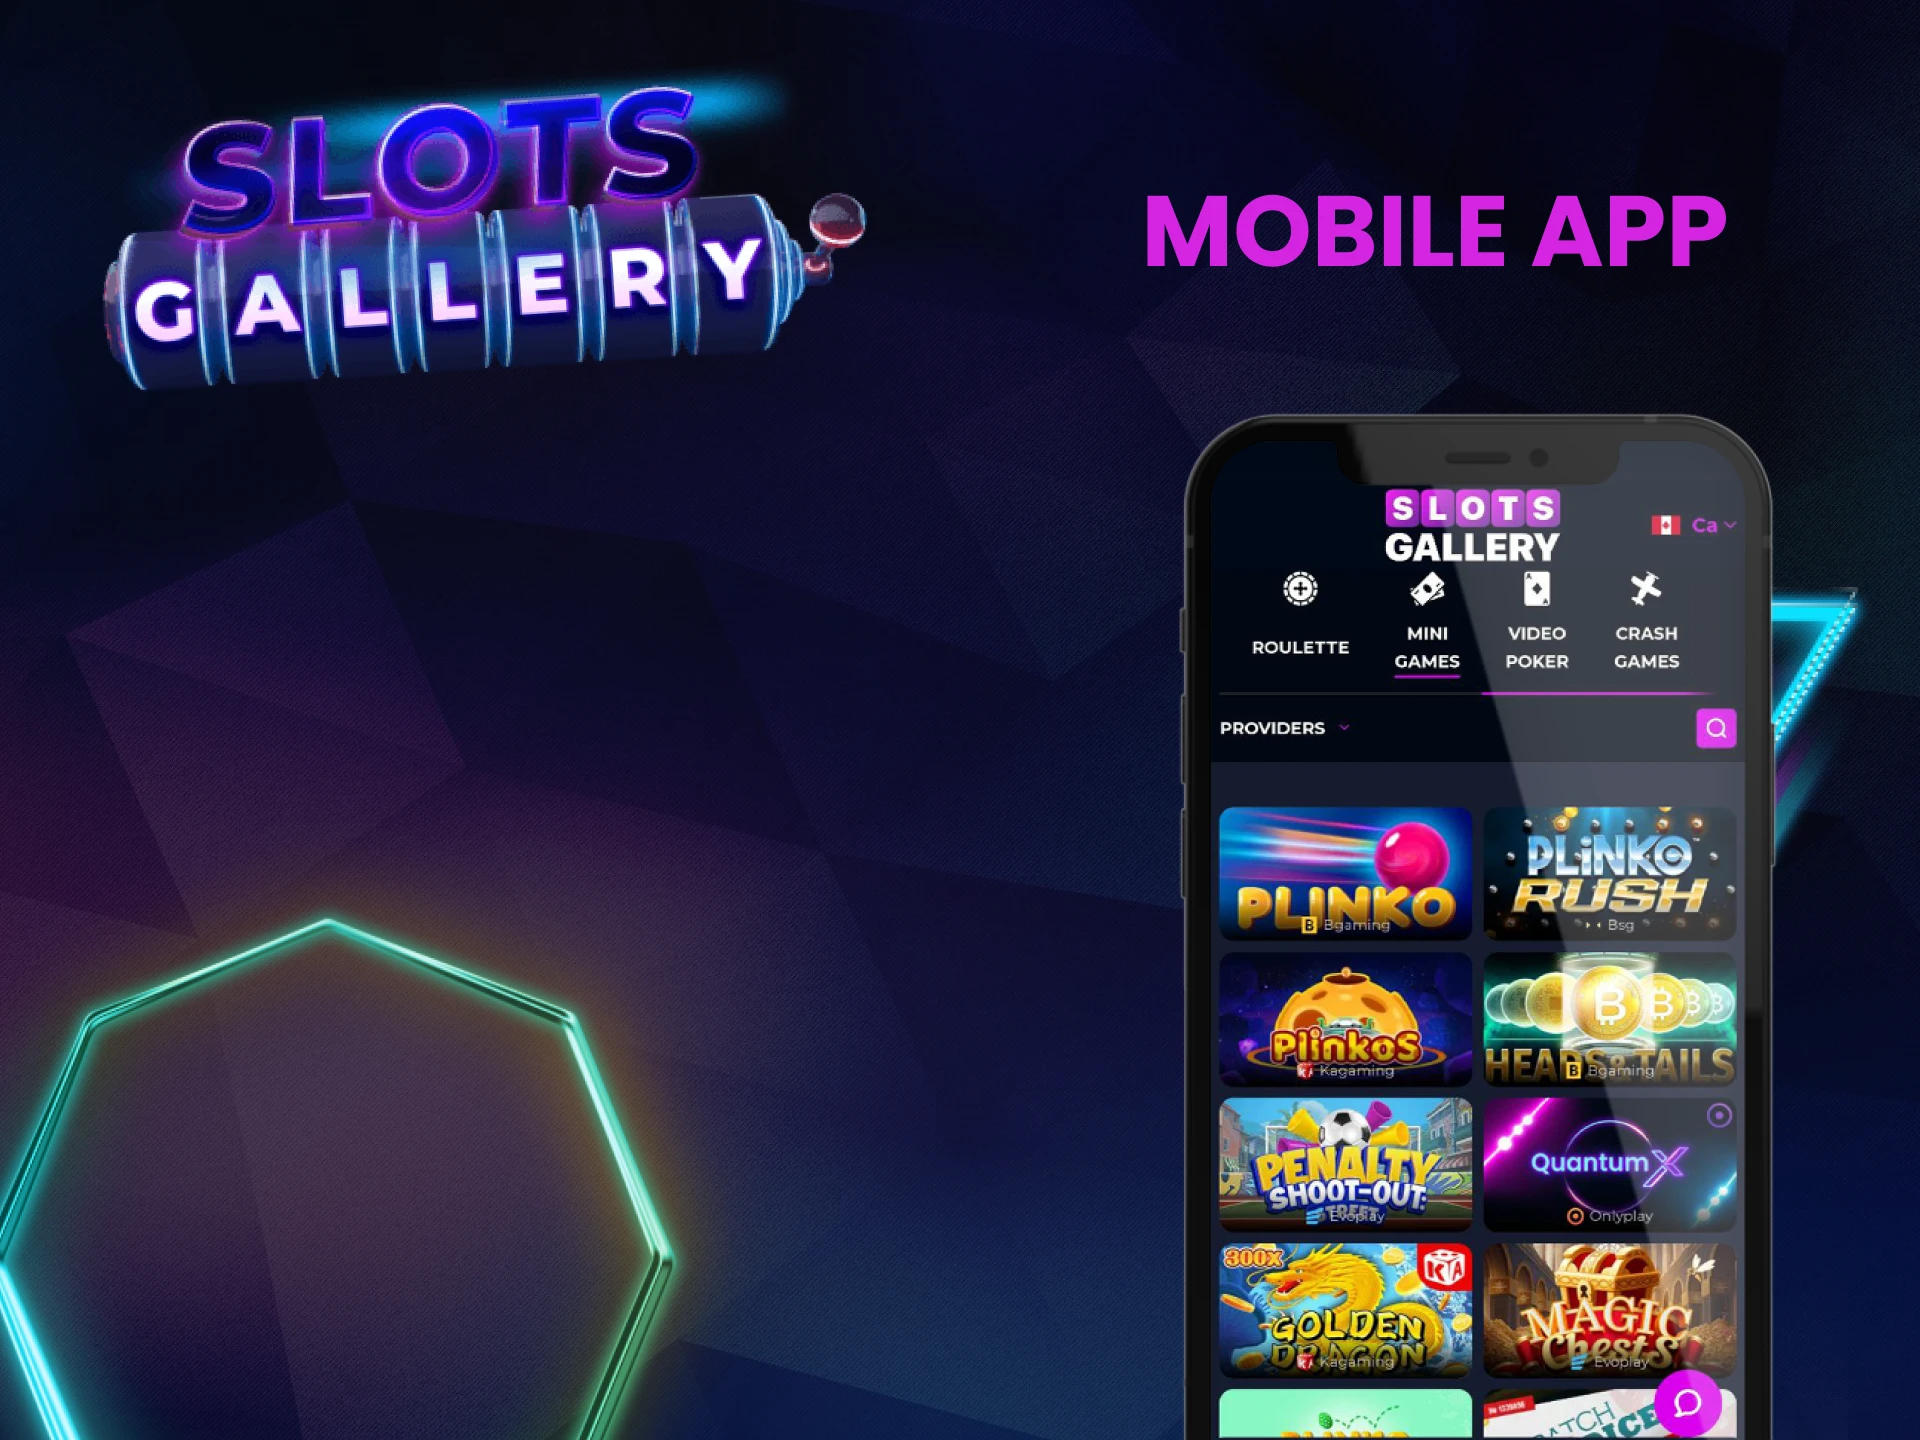 Play mini games from Slots Gallery on your phone.